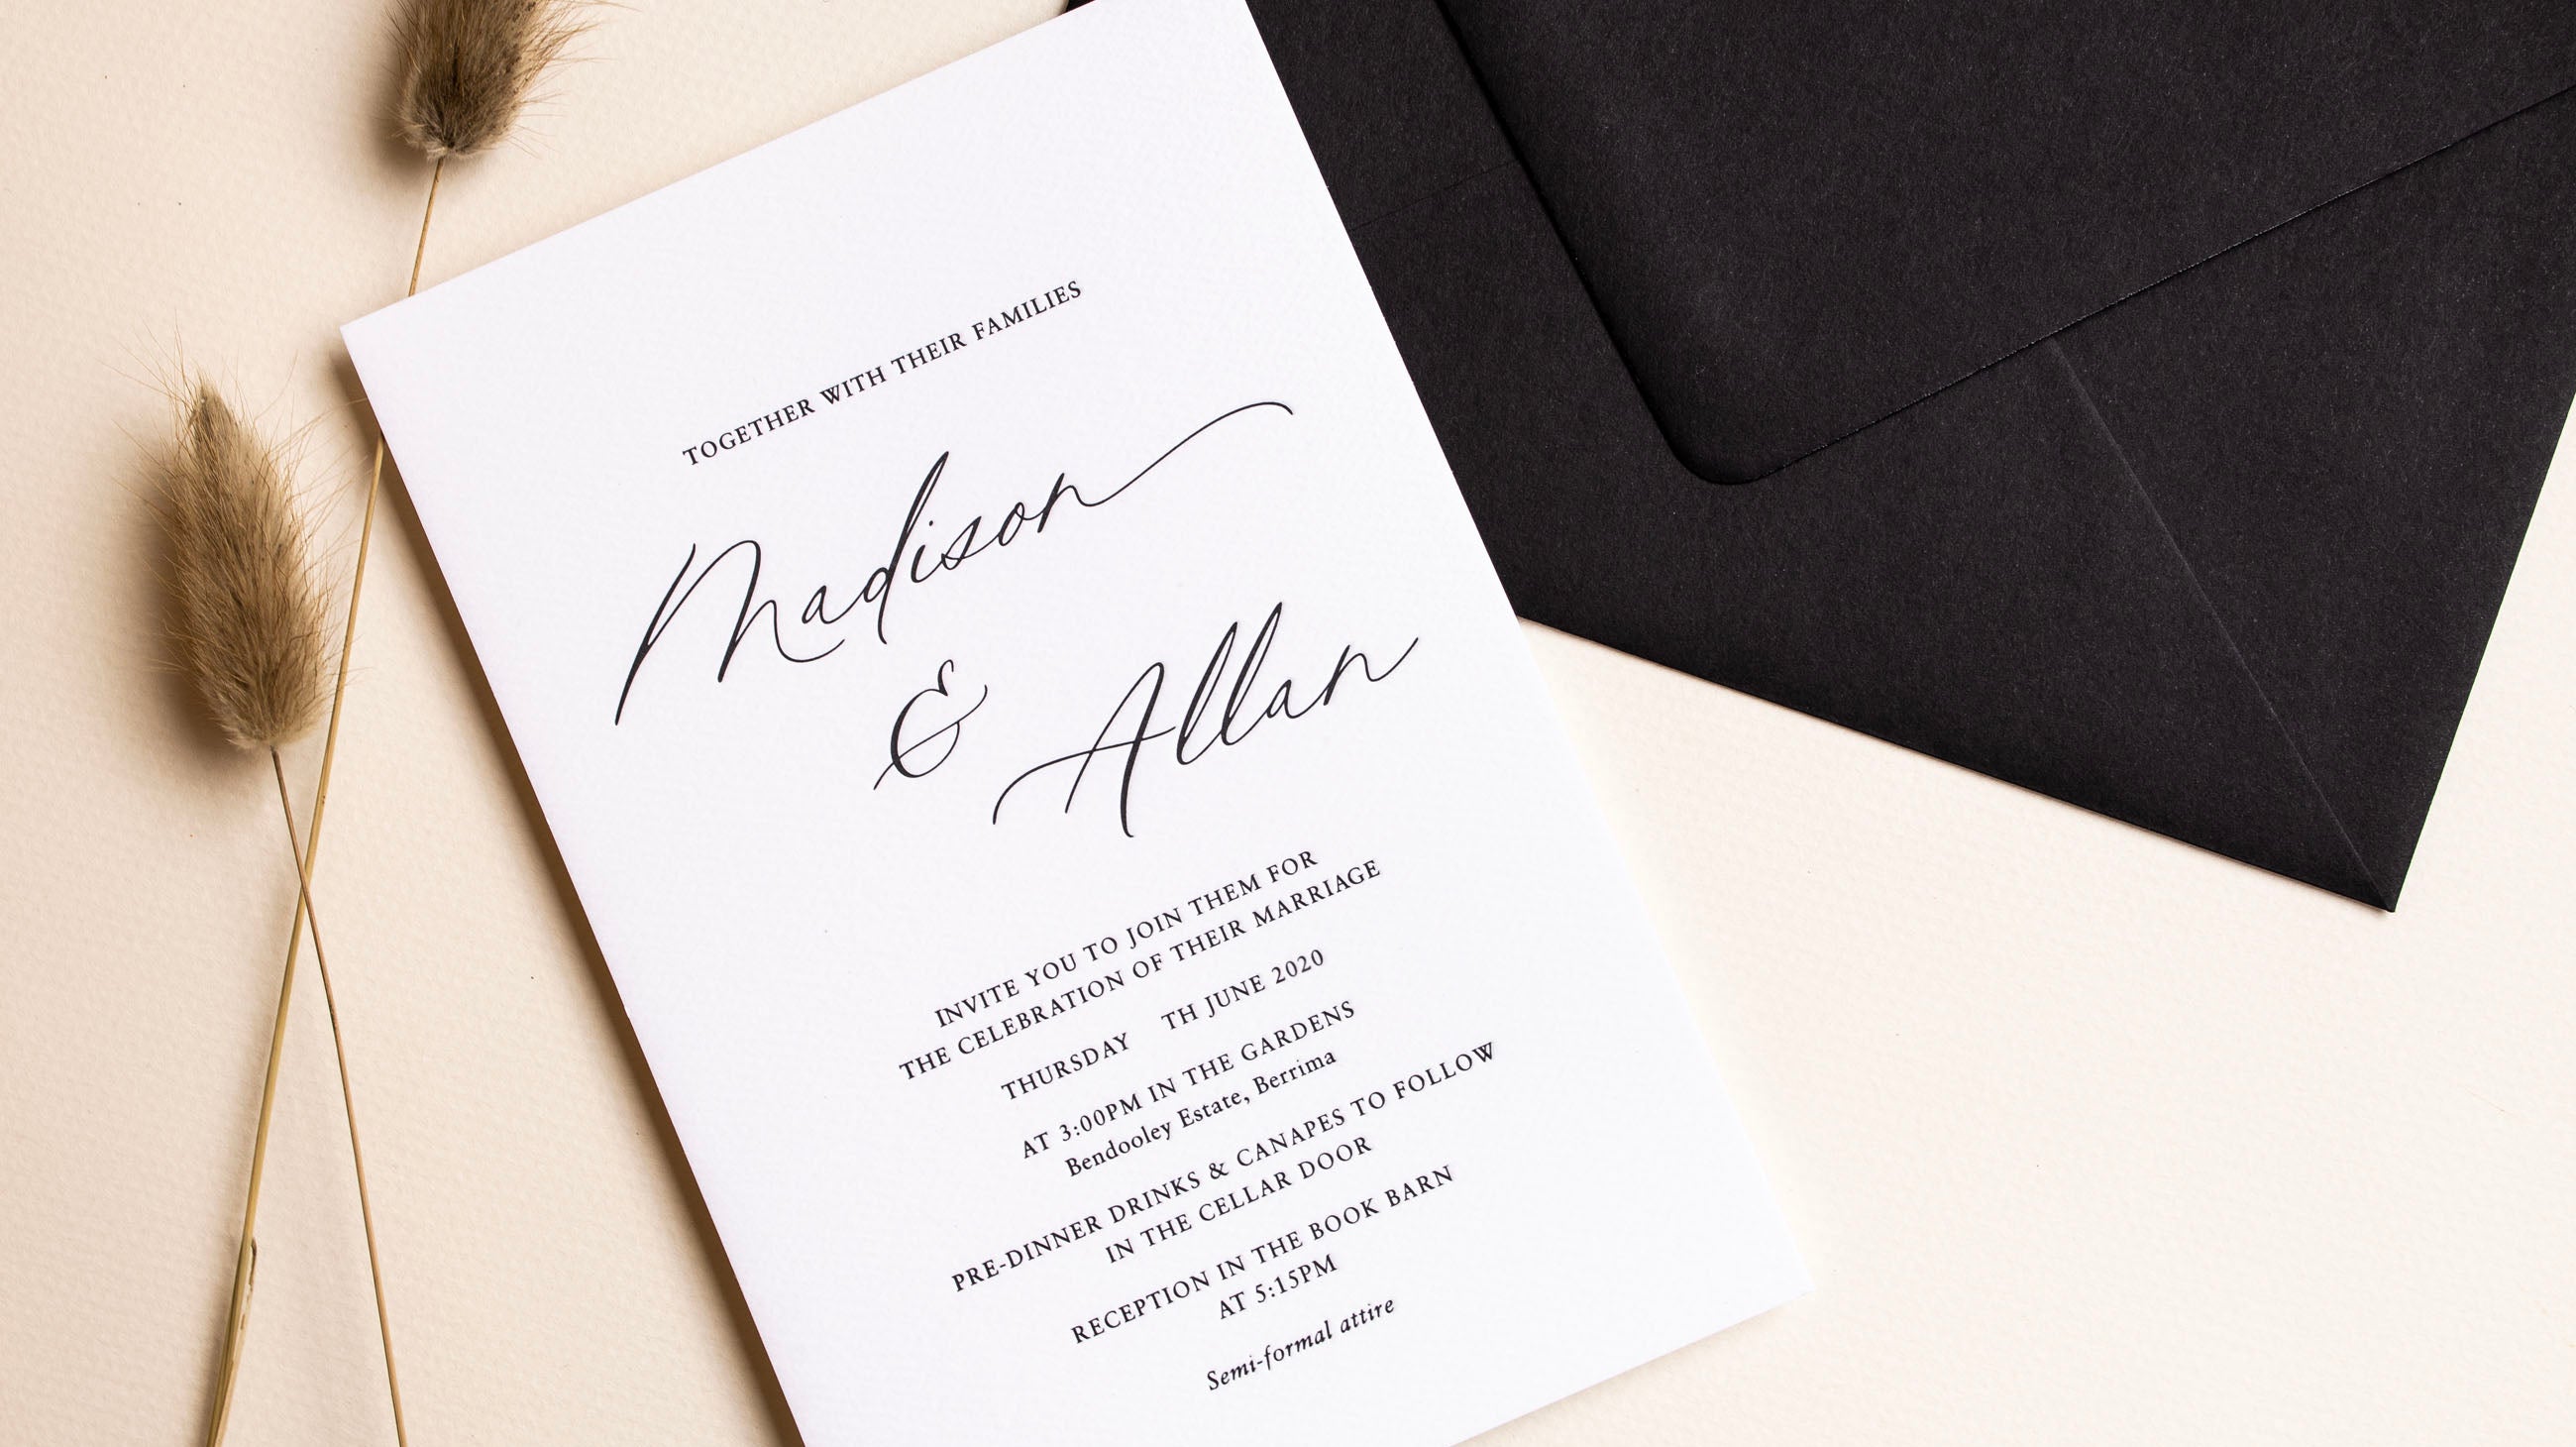 How are letterpress invitations made?